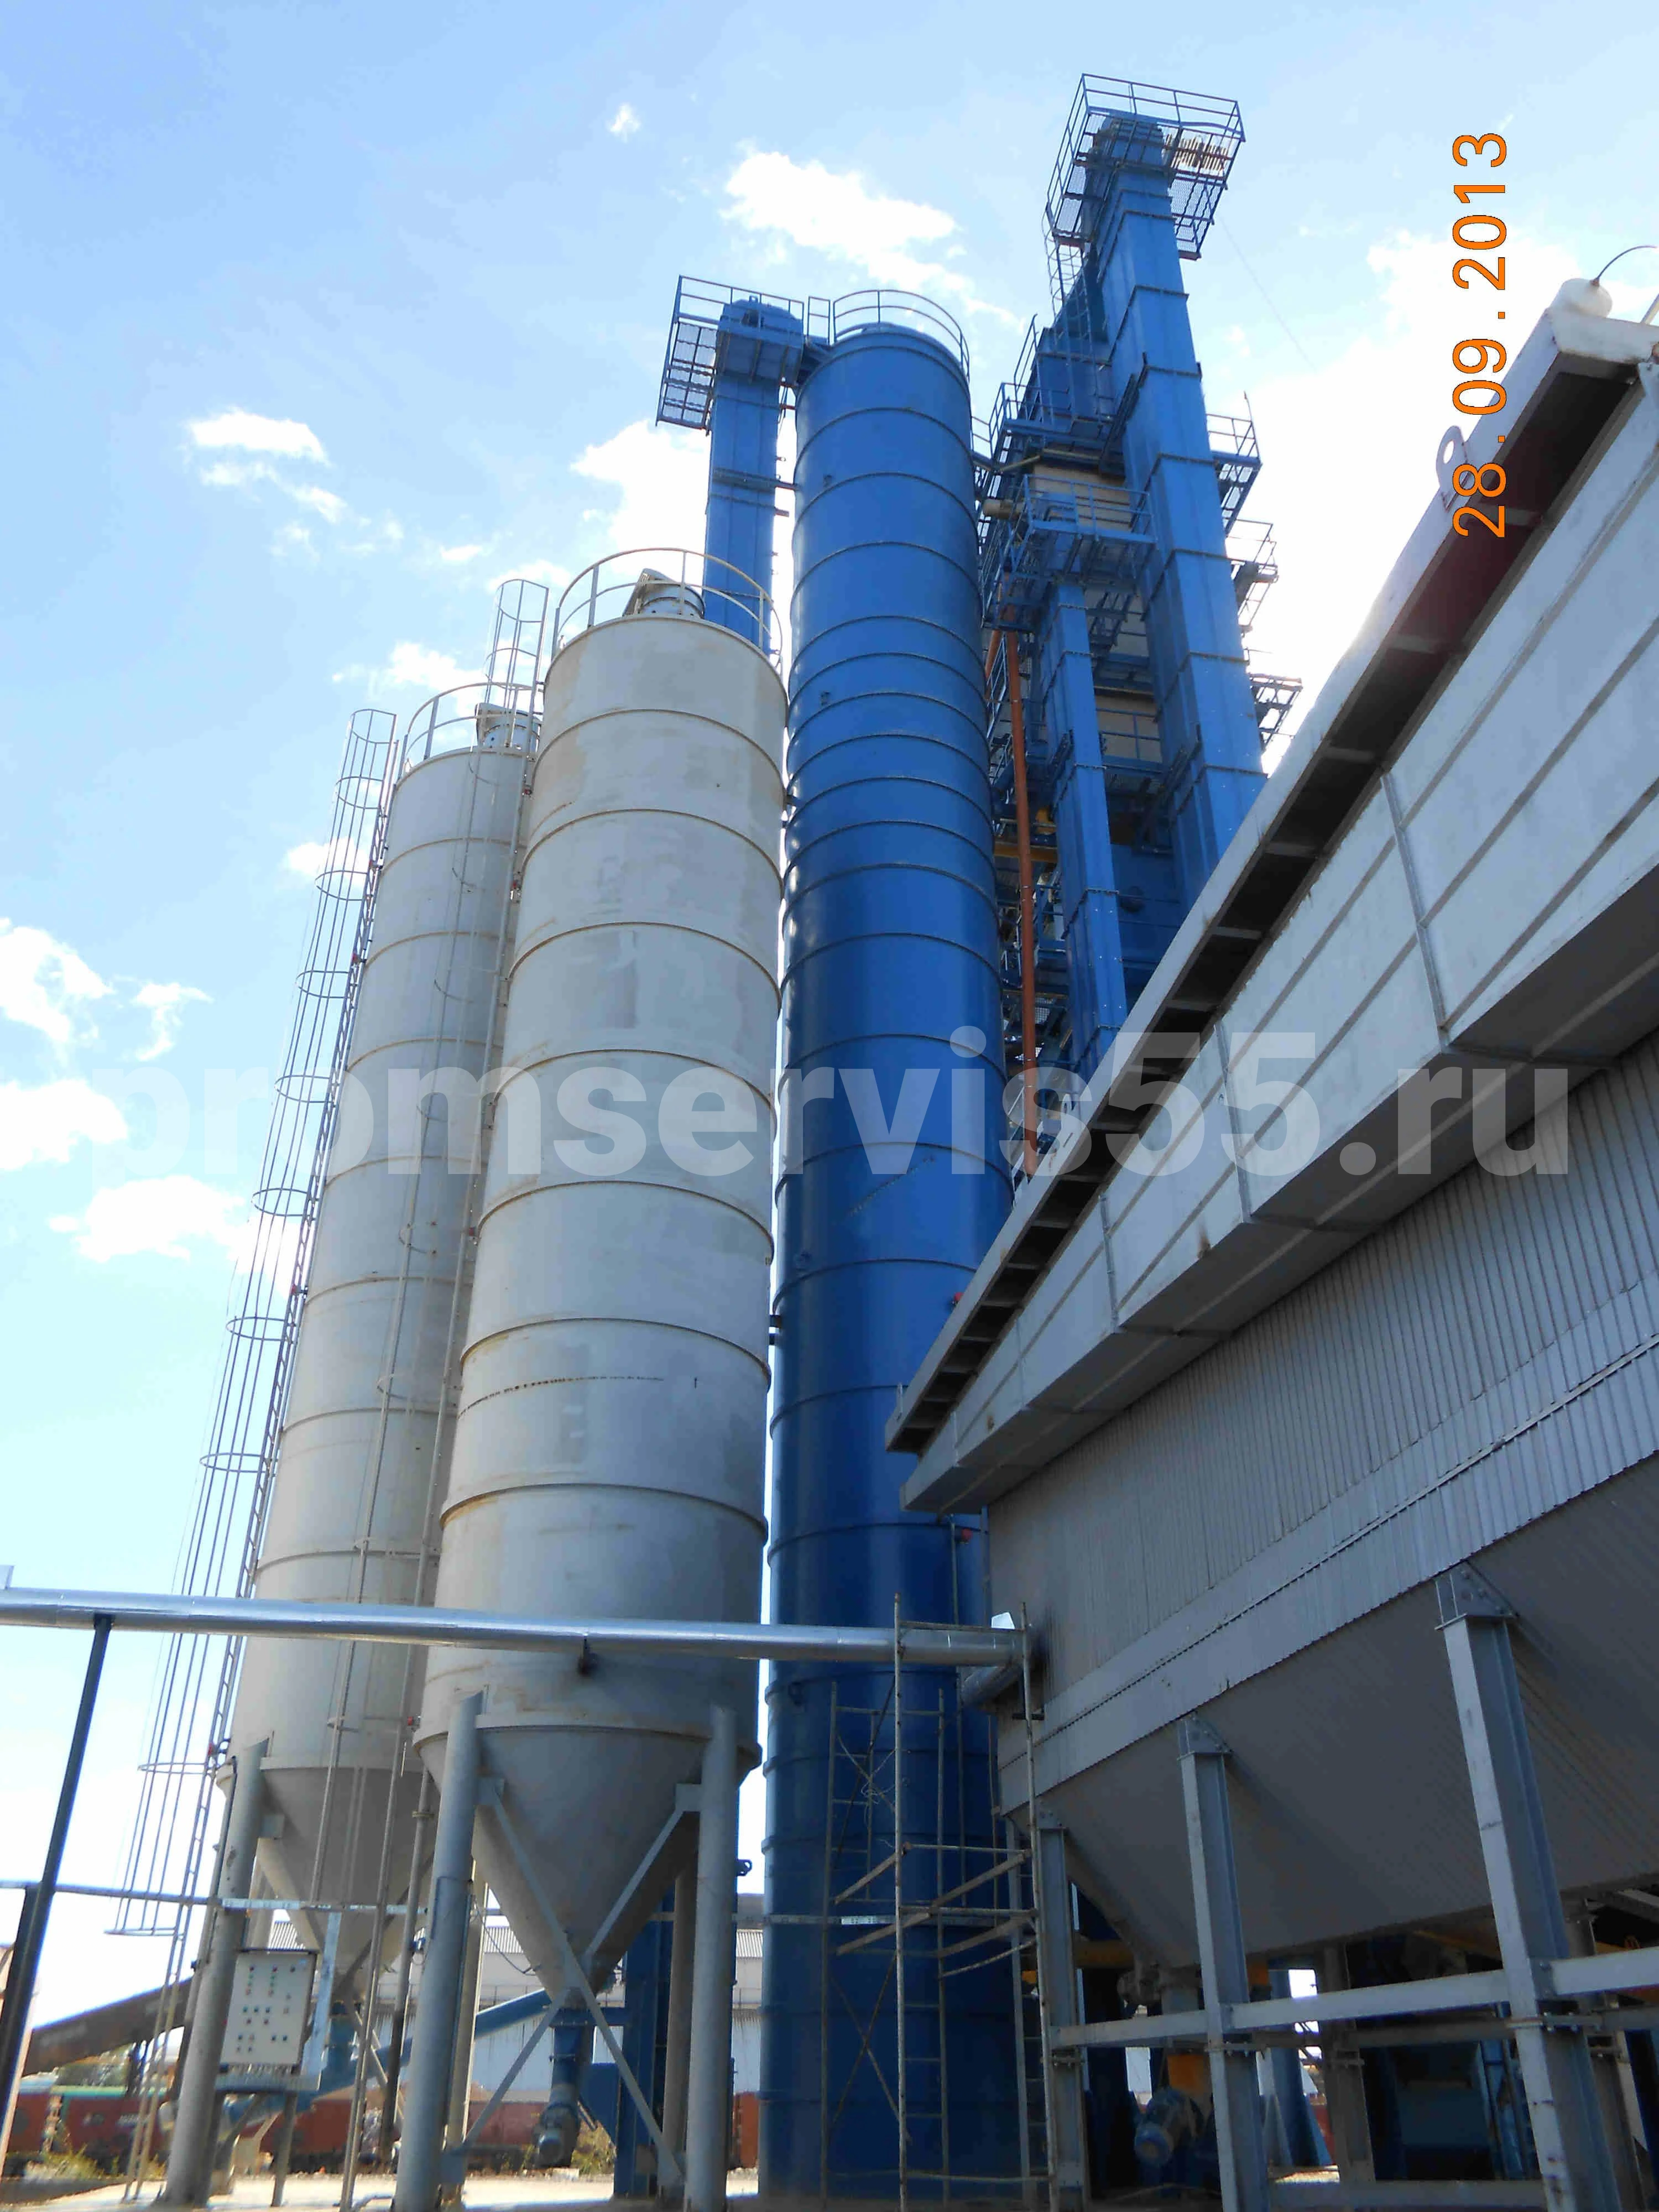 Mineral Powder and Dust Hopper - 2